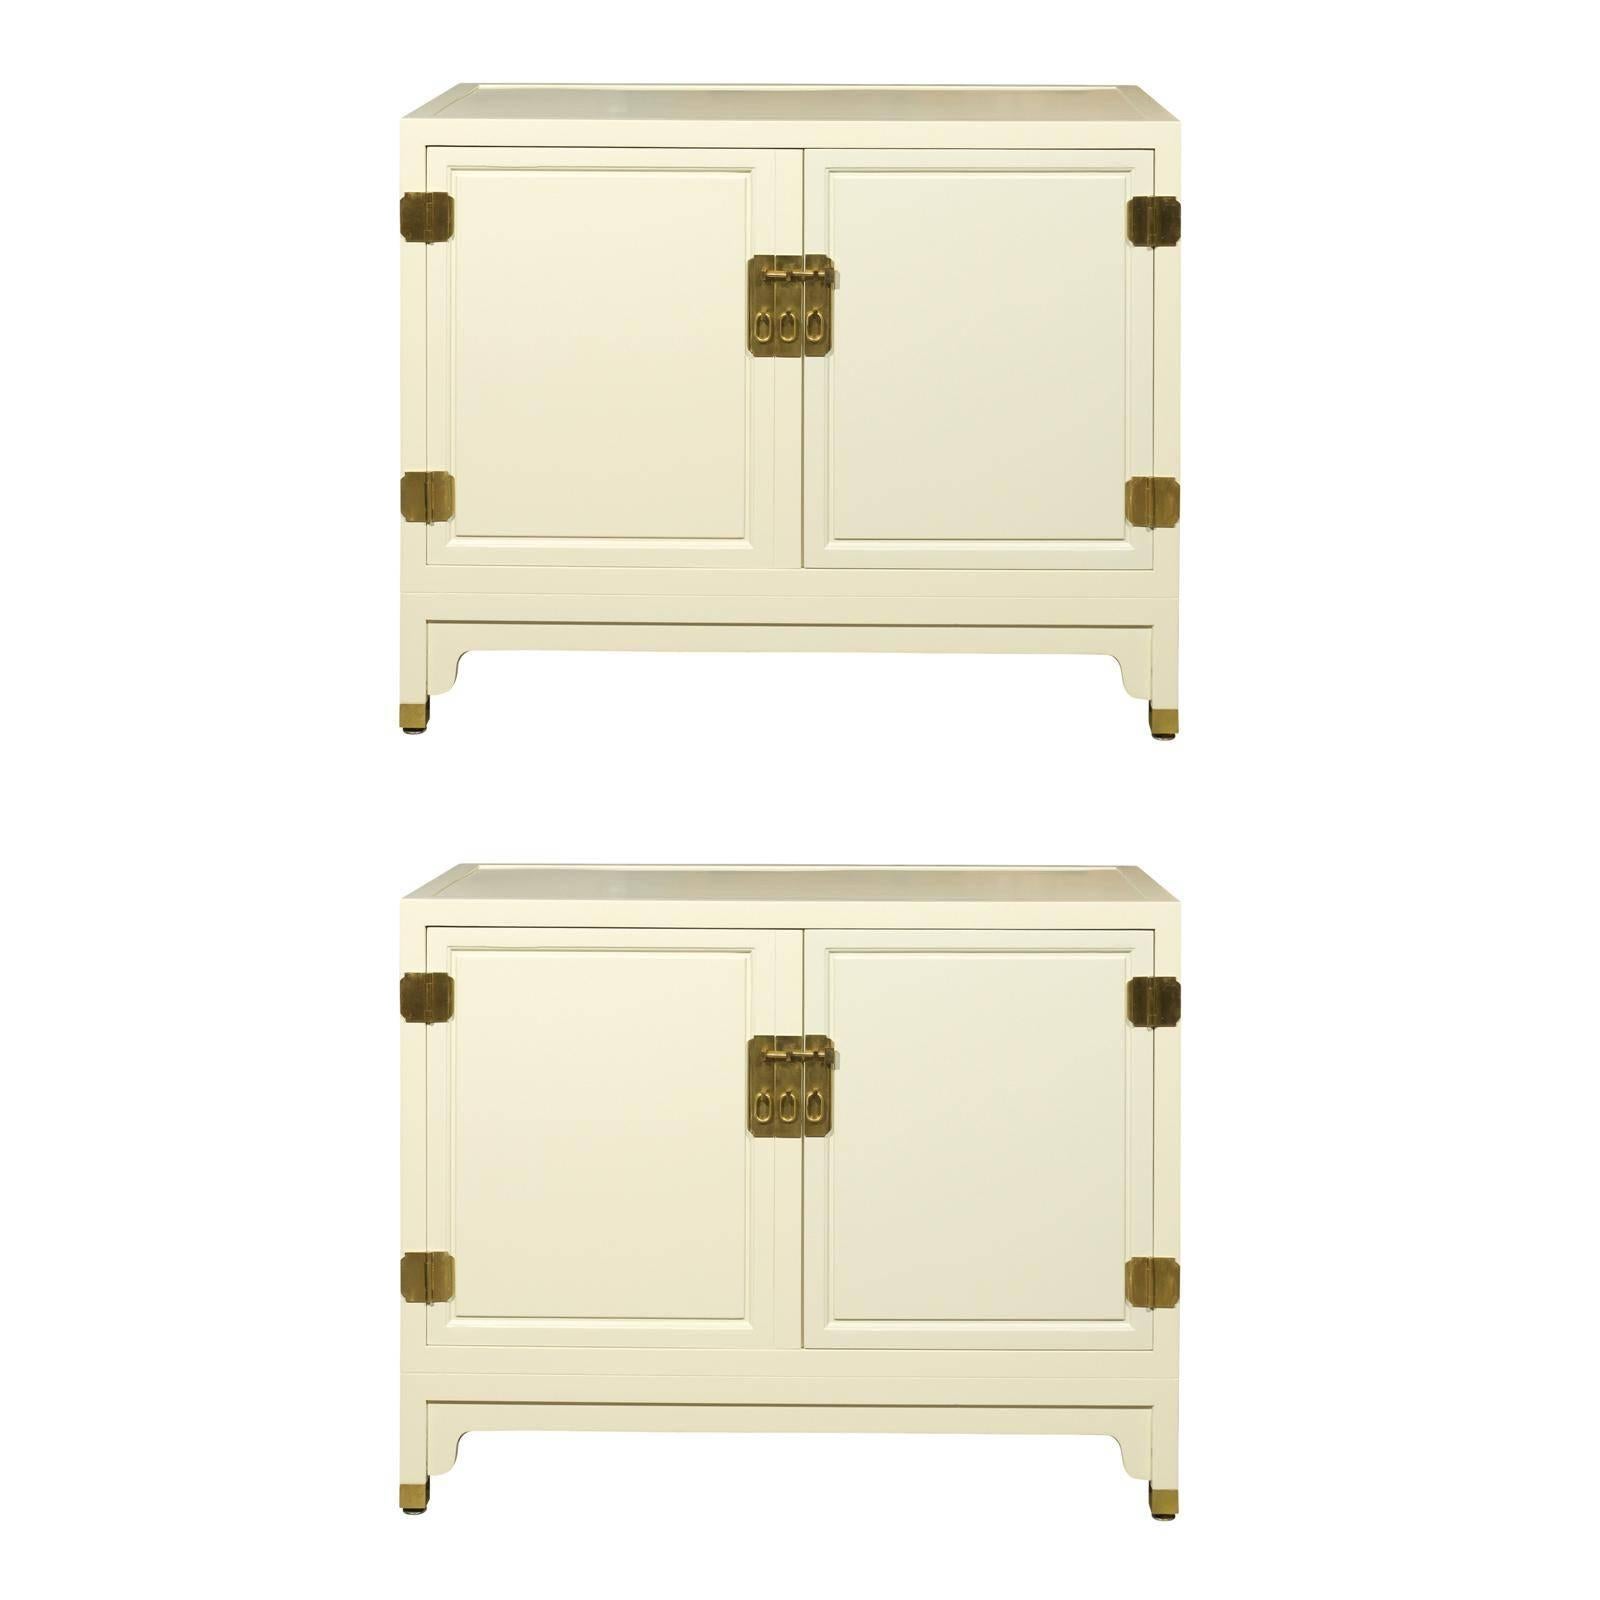 Elegant Pair of Vintage Baker Cabinets Restored in Cream Lacquer